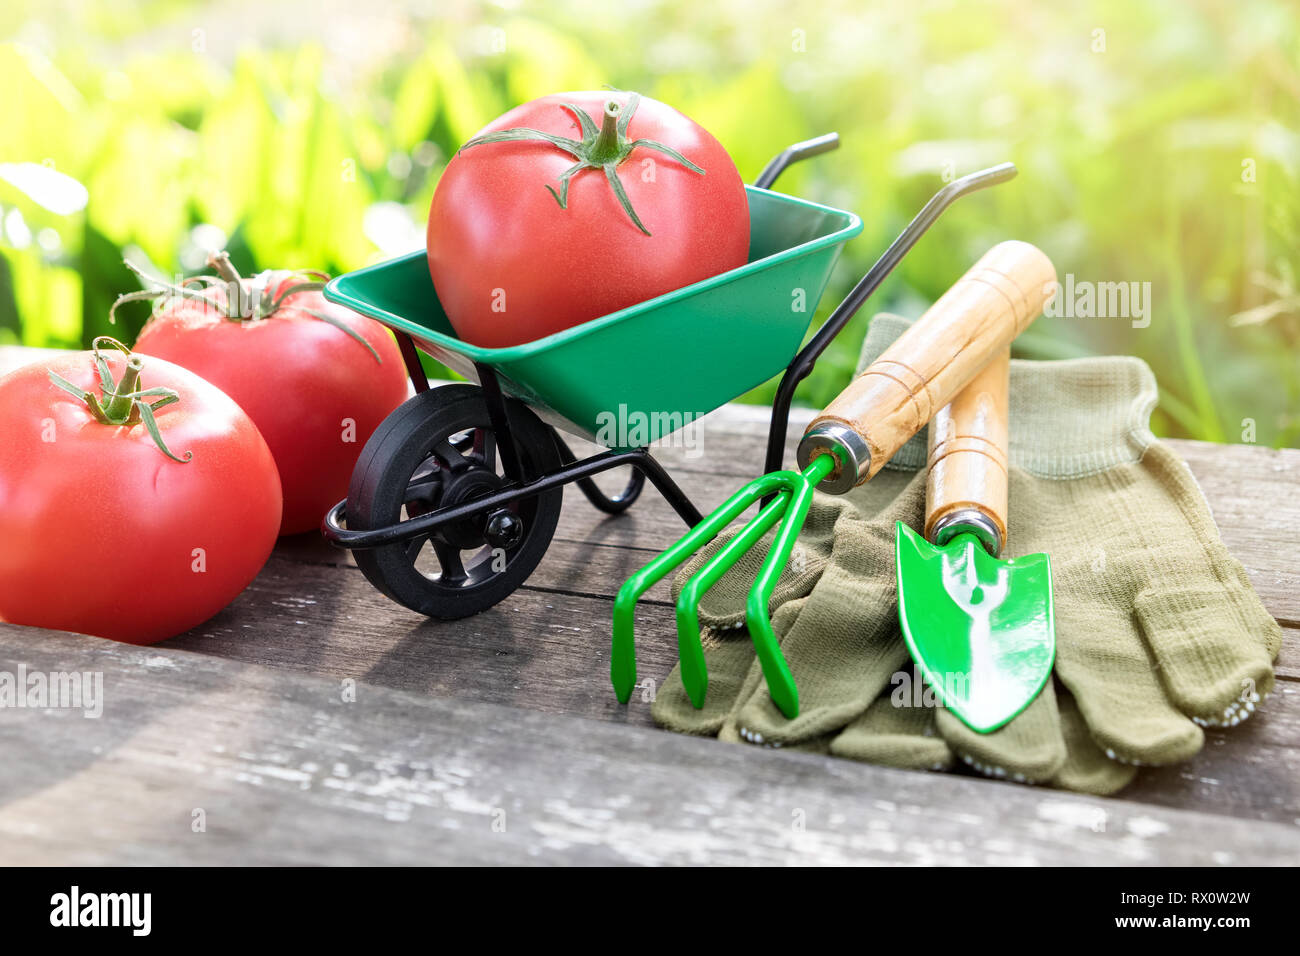 Small garden wheelbarrow with red ripe tomatoes, rake, shovel and gloves on wooden bench in garden. Stock Photo